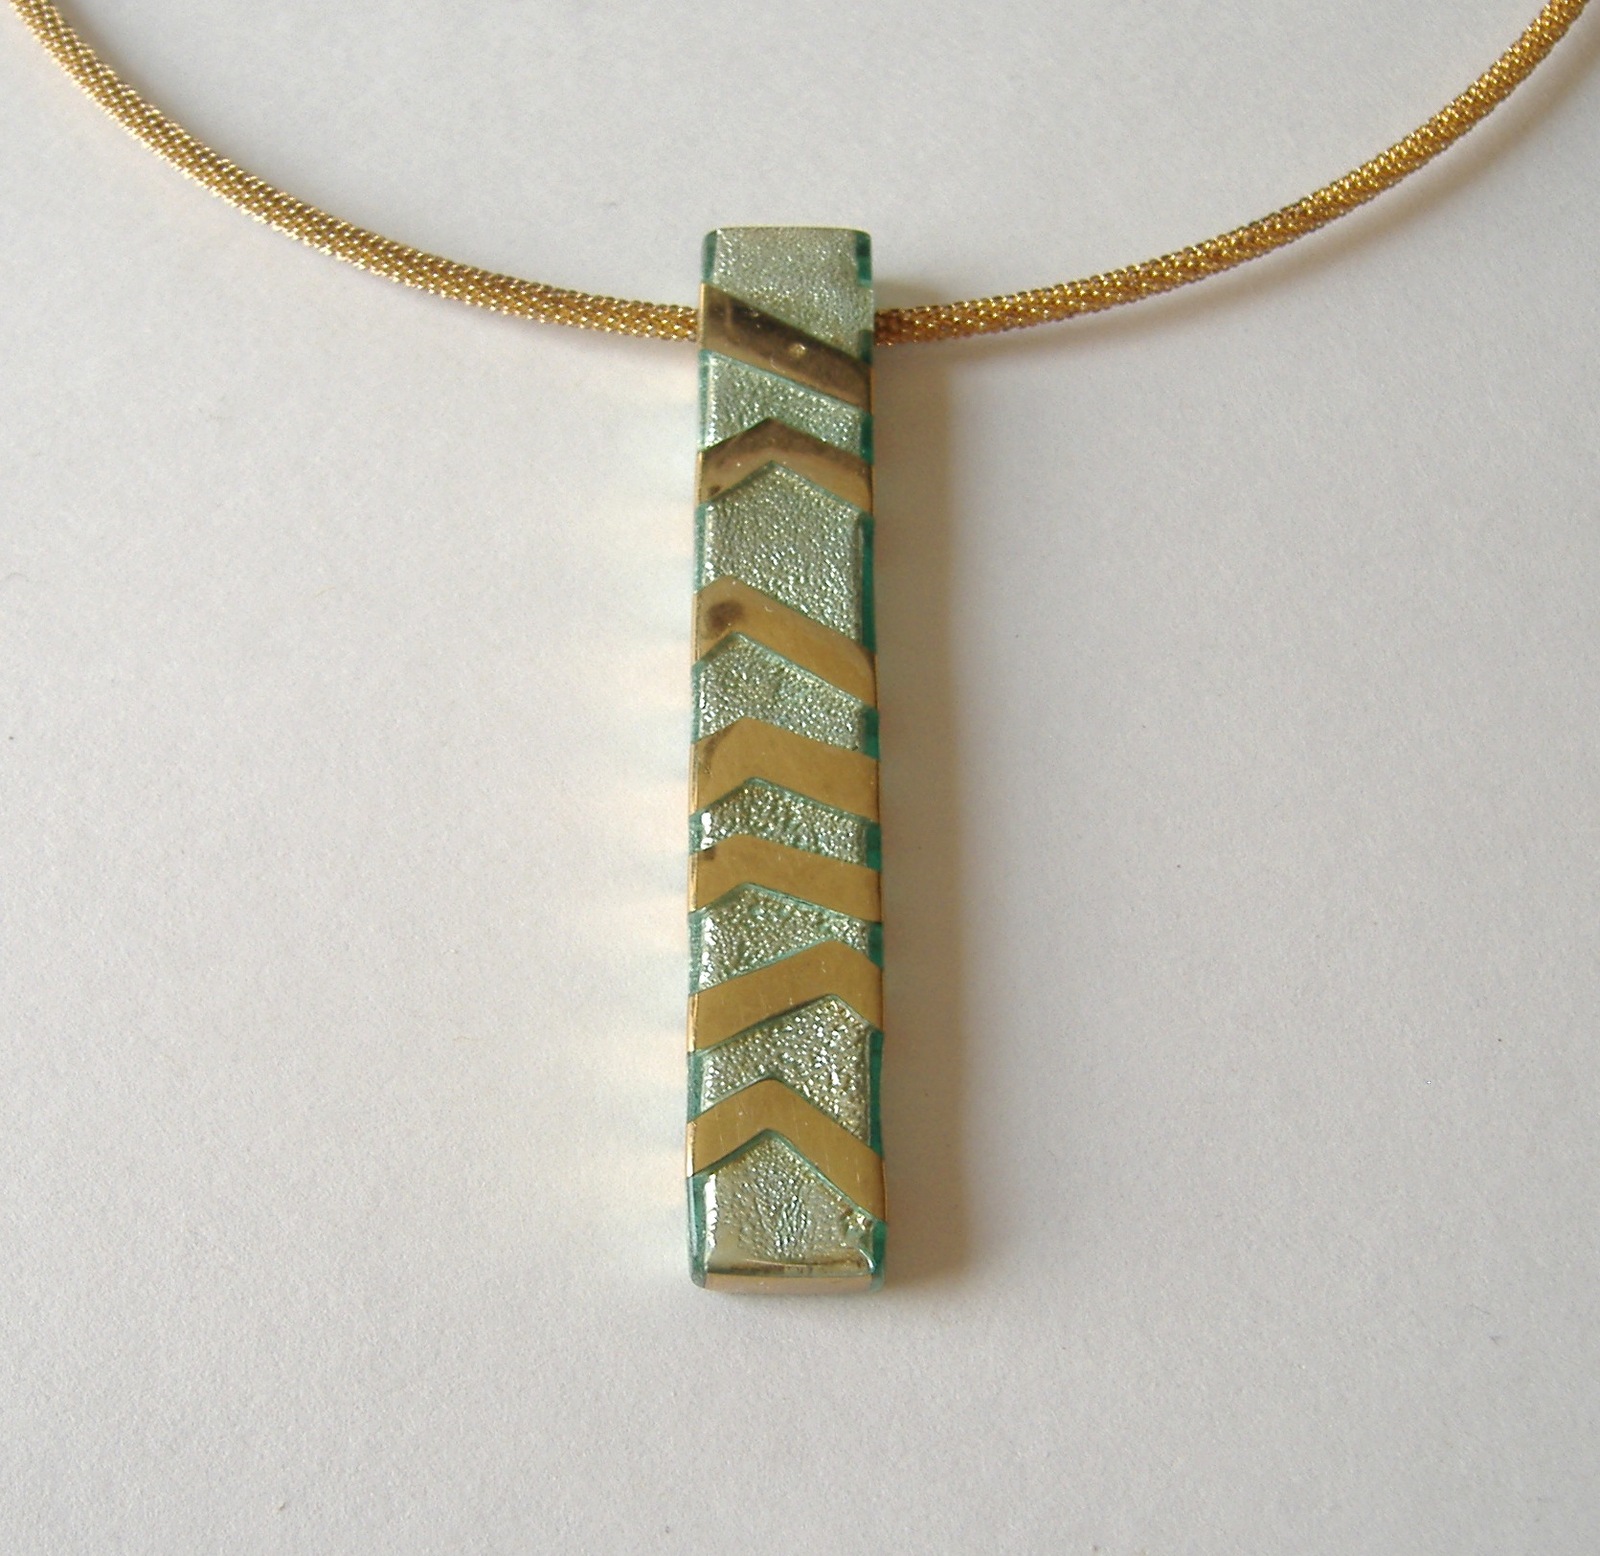 Primary image for Aqua Blue Gold Resin Pendant Contemporary Handcrafted Neckwire Necklace